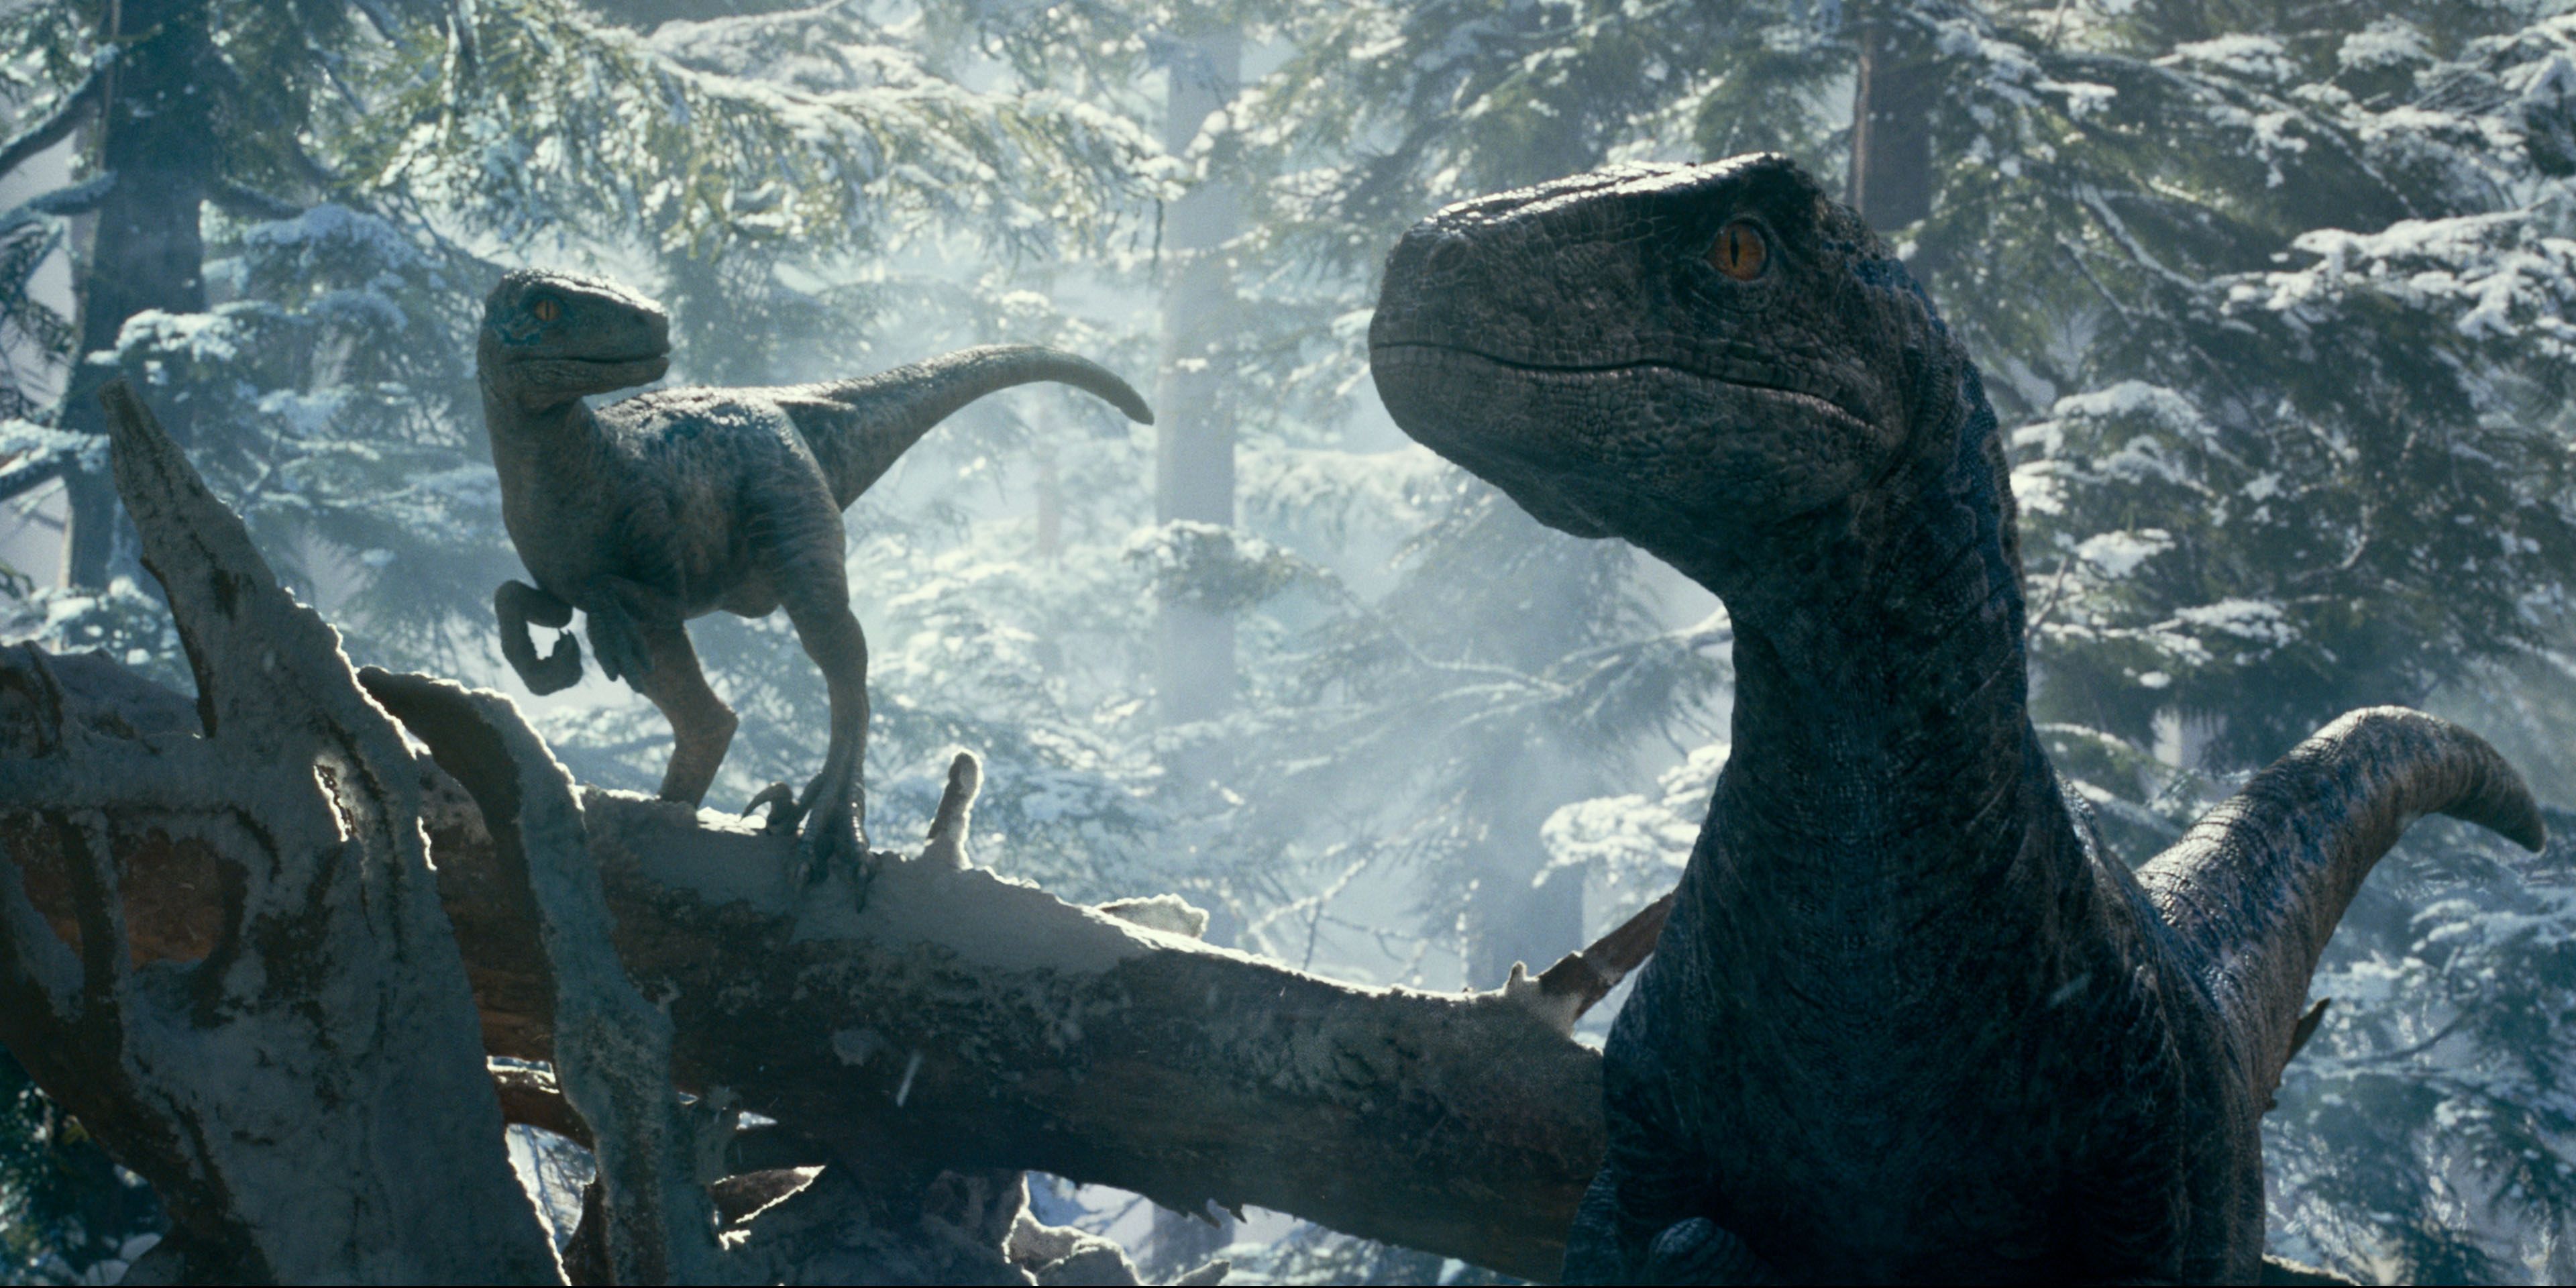 Why Do the Jurassic World Movies Keep Making Up Dinosaurs?